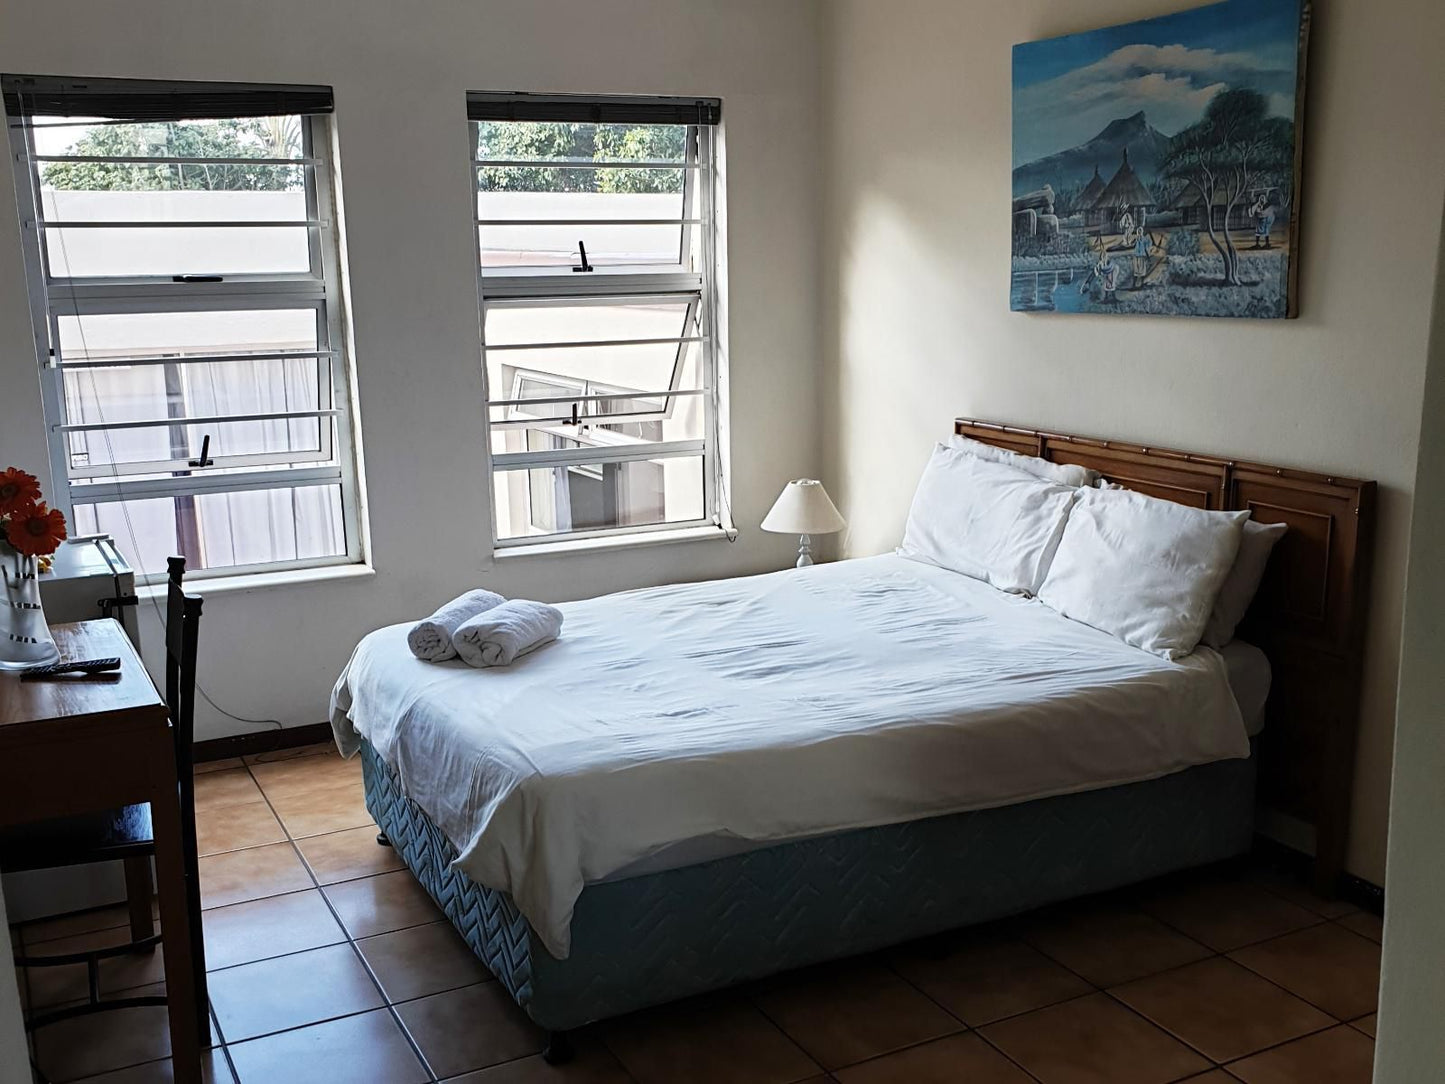 Amakaya Backpackers Travellers Accommodation Plett Central Plettenberg Bay Western Cape South Africa Bedroom